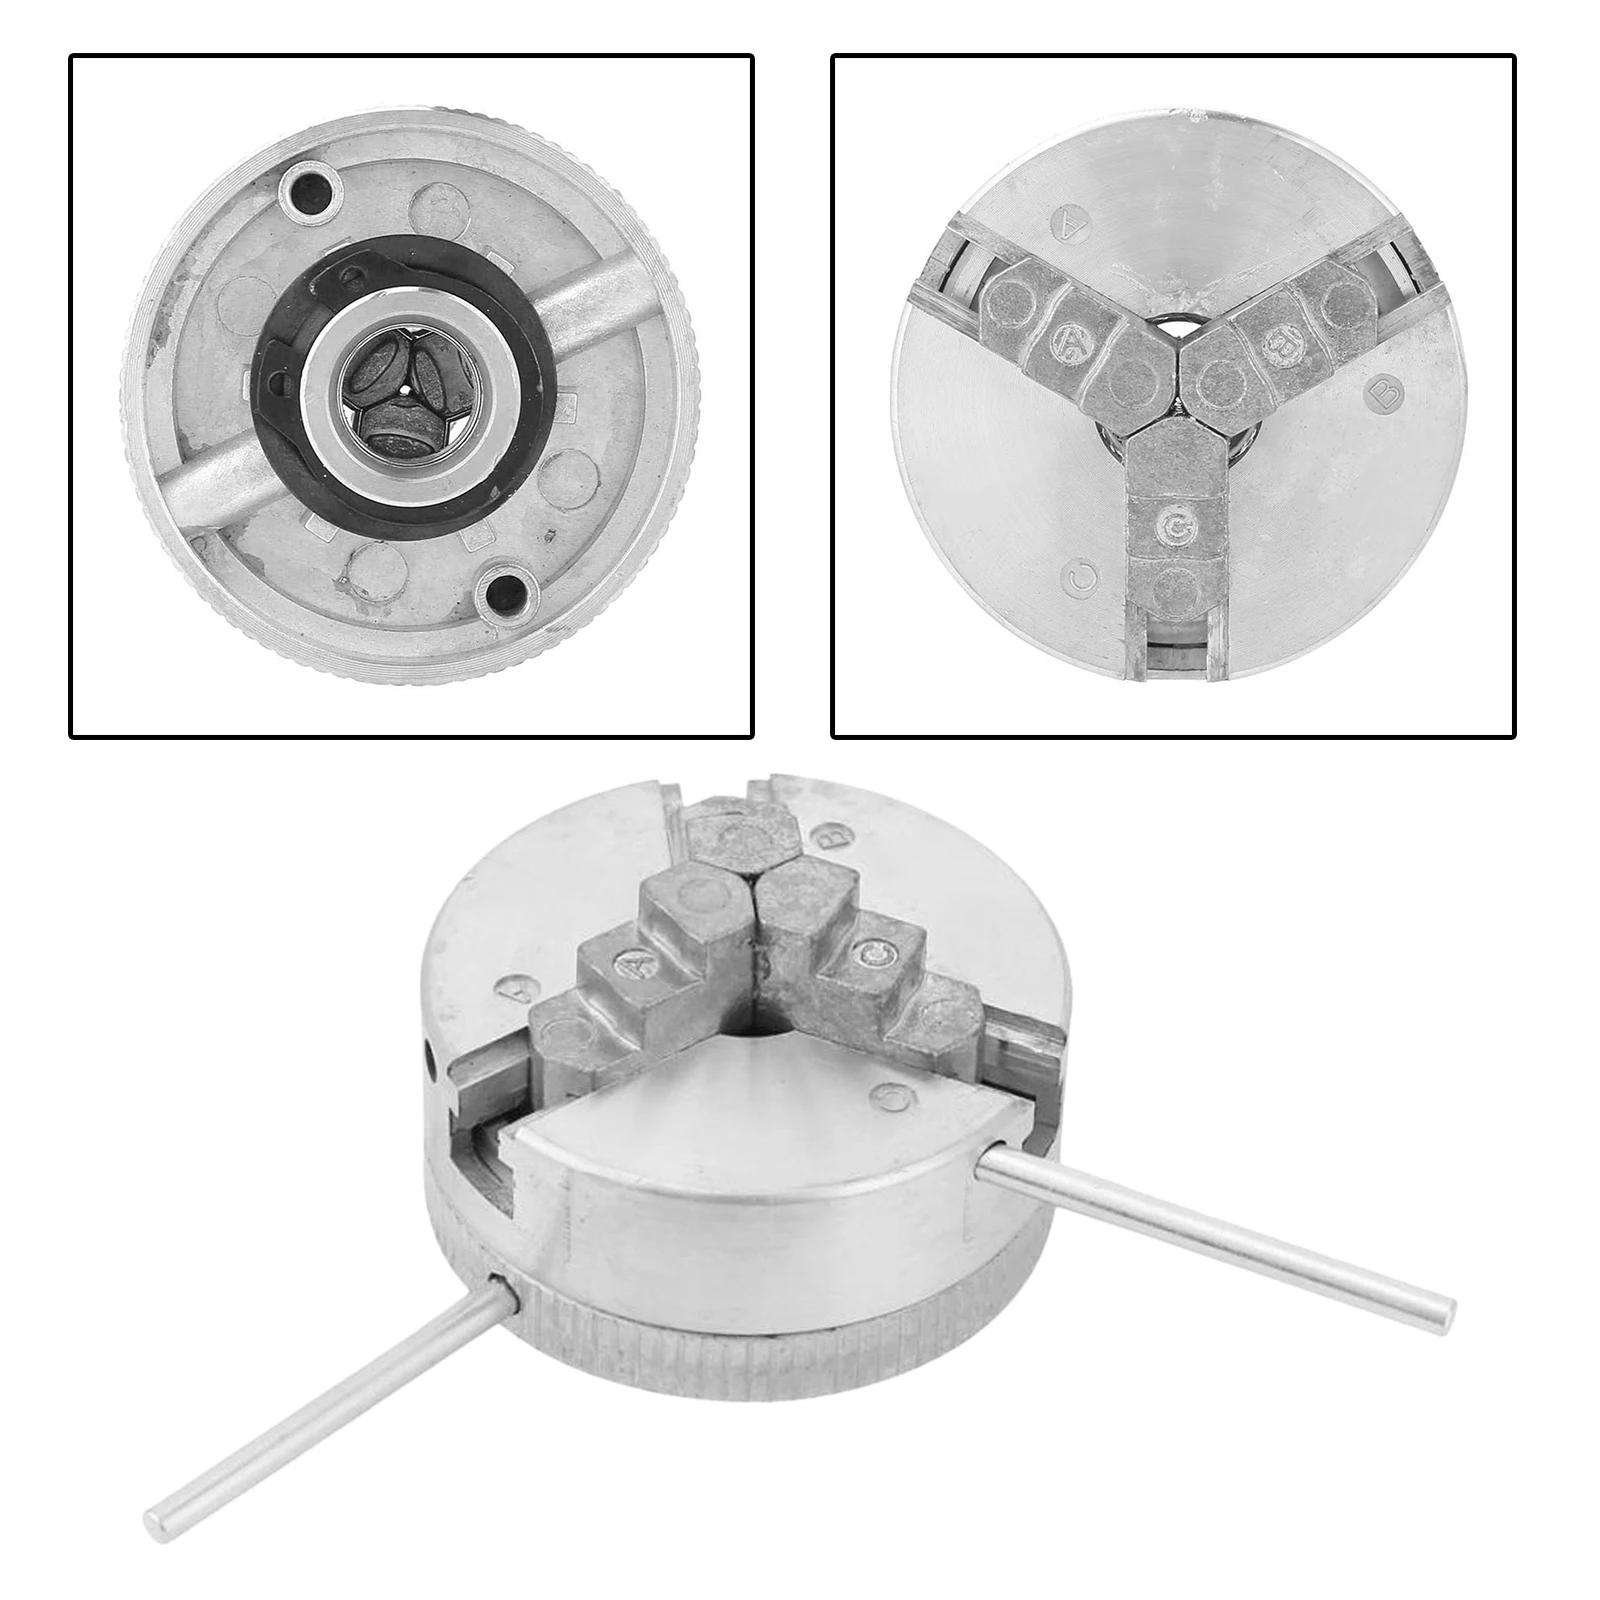 Three-Jaw Chuck with 2 Adjustment Lever, Self Centering Lathe Chuck for Woodworking Lathe, Clamping Diameter 1.8~56 mm/12~65 mm